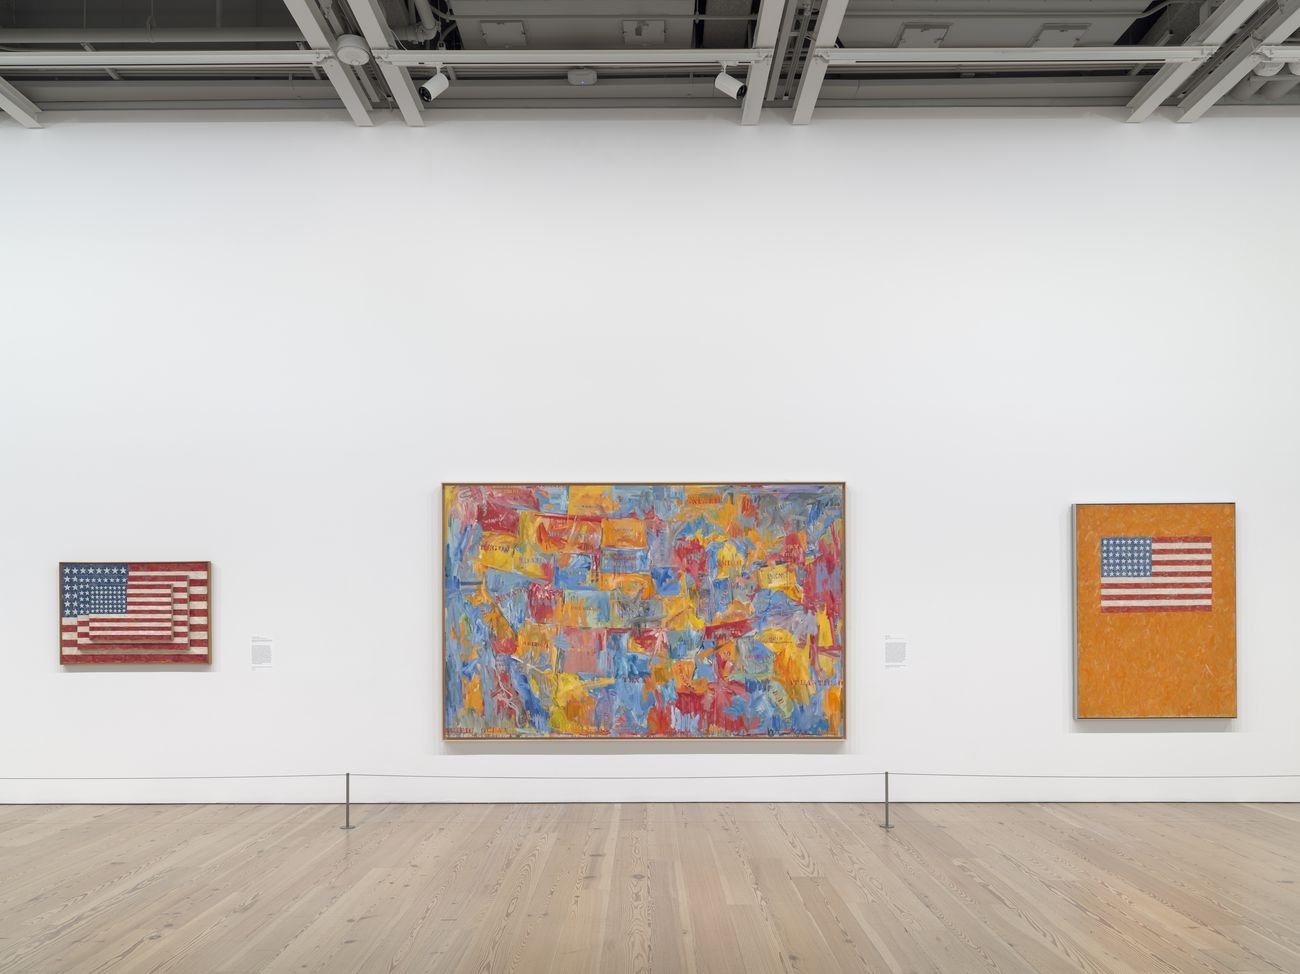 Installation view of Jasper Johns: Mind/Mirror (Whitney Museum of American Art, New York, September 29, 2021-February 13, 2022). From left to right: Three Flags, 1958; Map, 1961; Flag on Orange Field, 1957. Photograph by Ron Amstutz